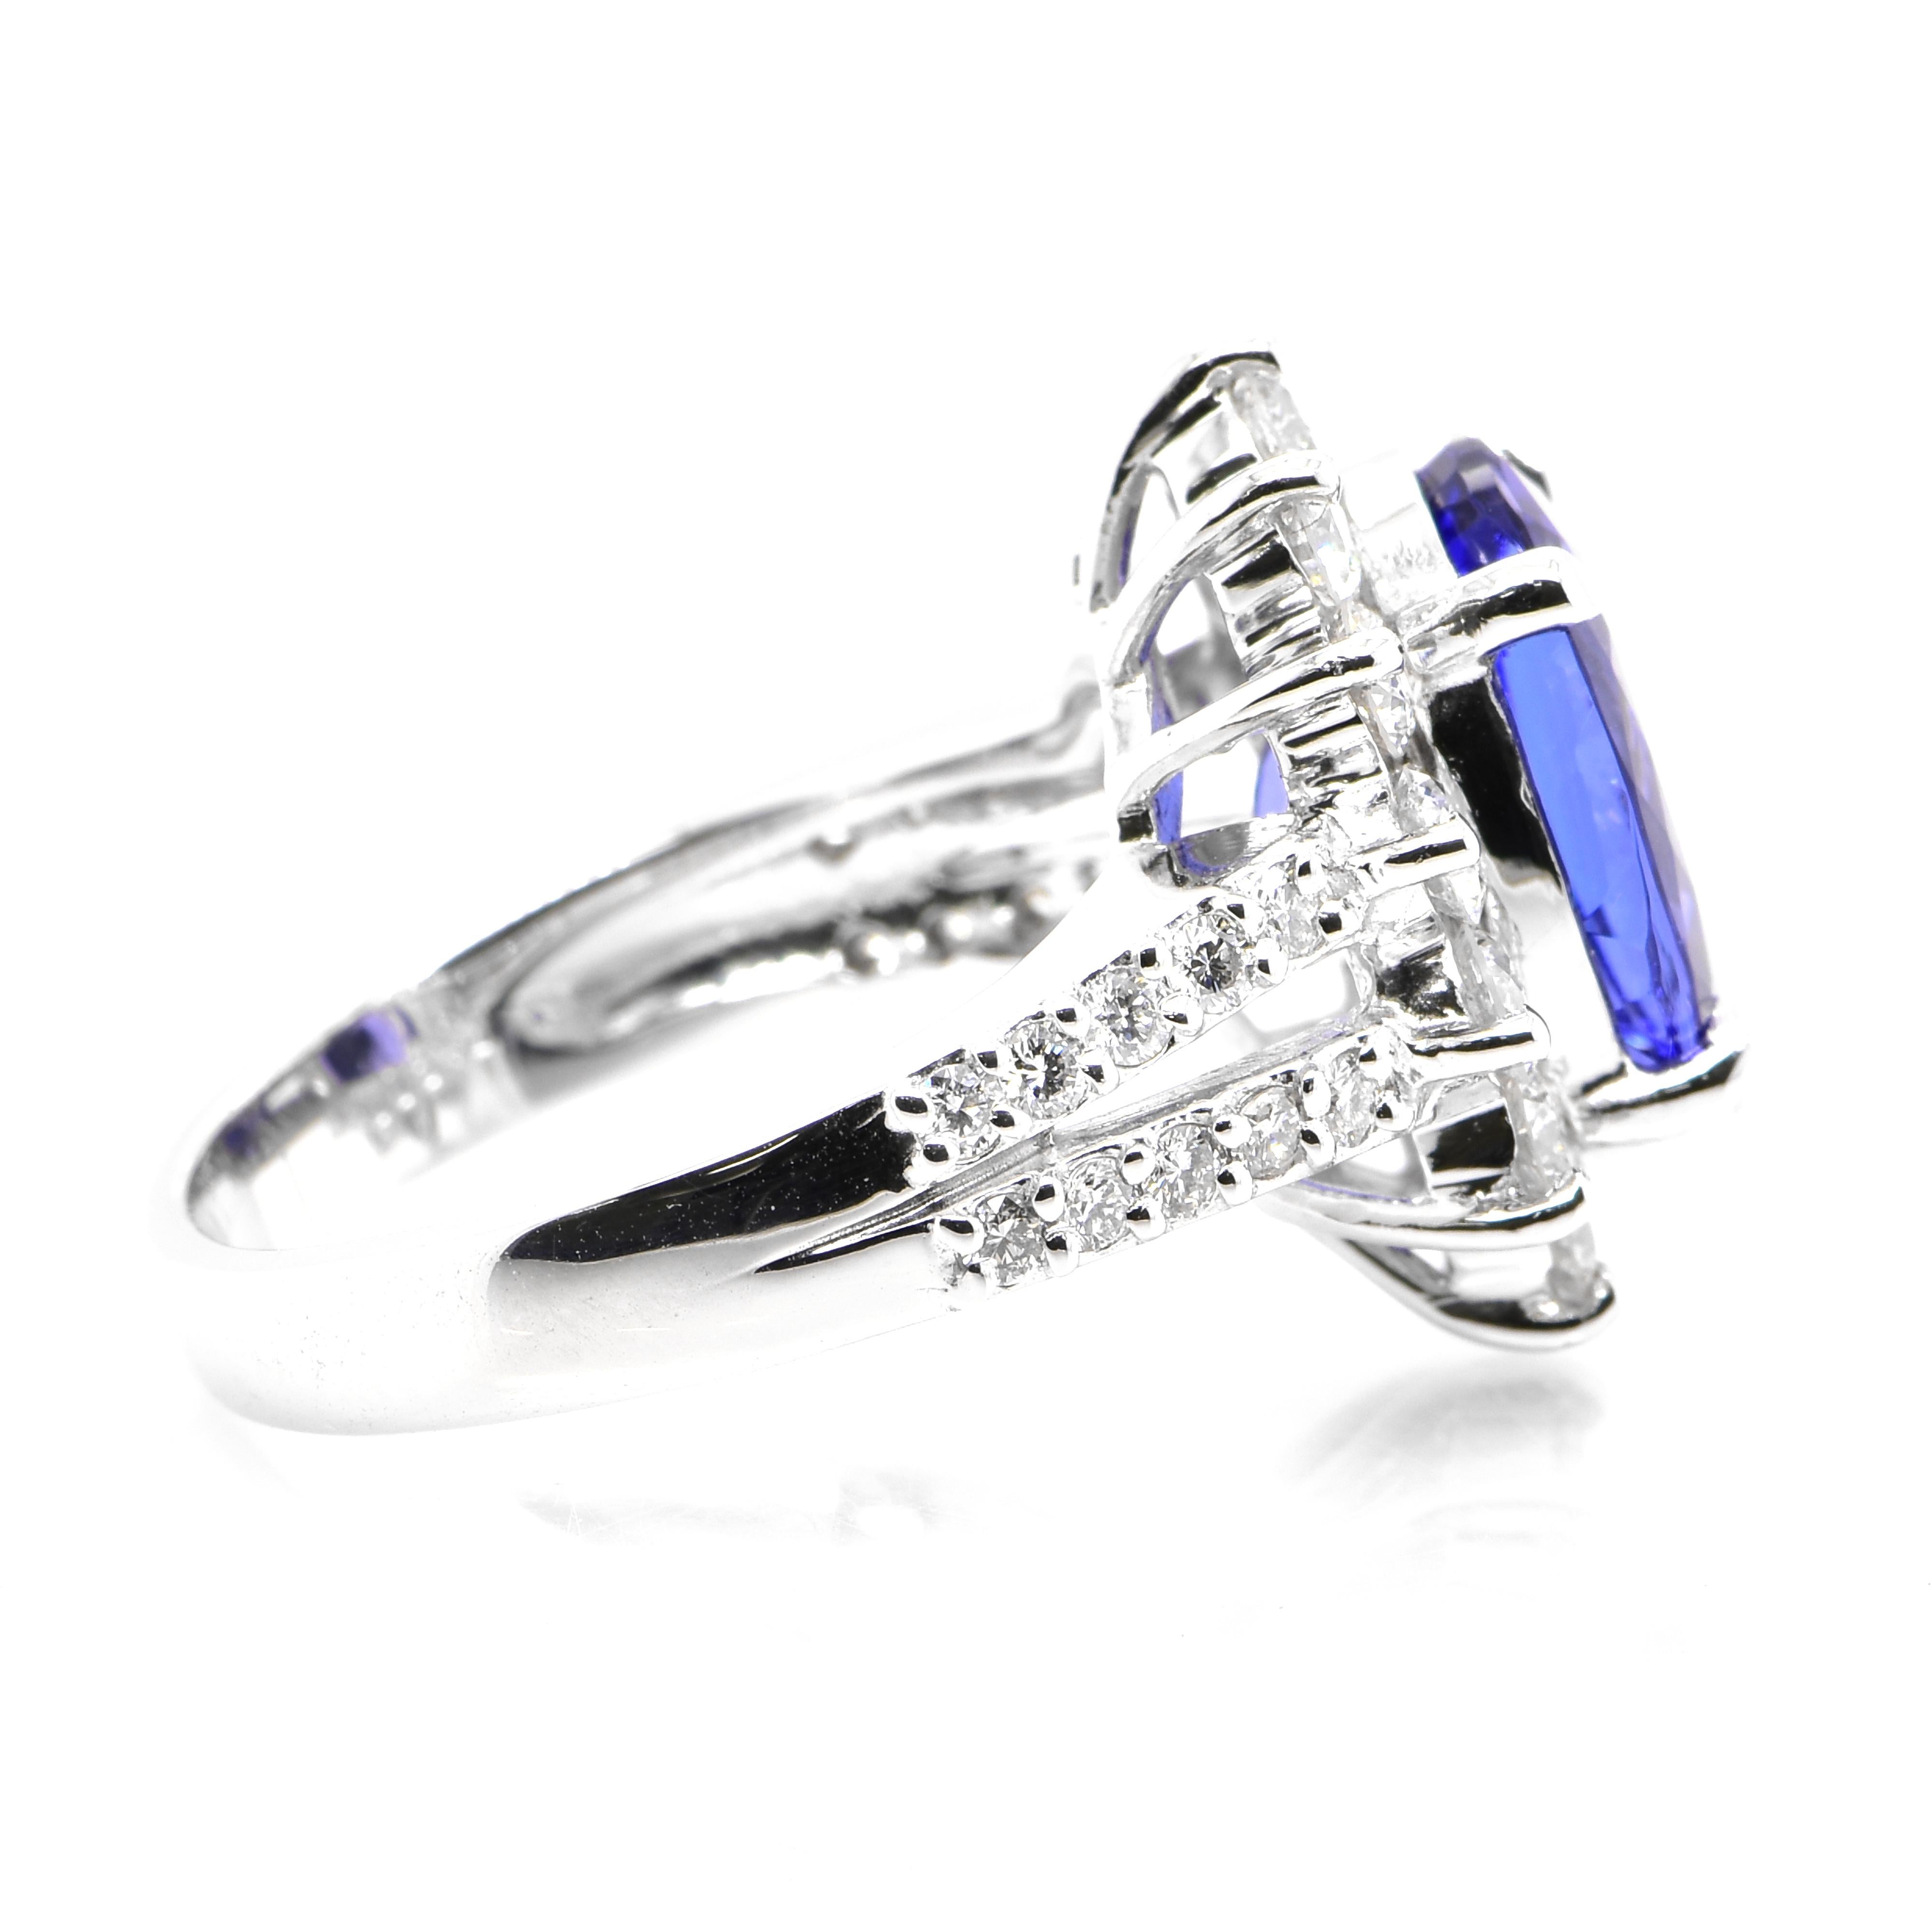 A beautiful ring featuring a 4.75 Carat Natural Tanzanite and 1.40 Carats Diamond Accents set in Platinum. Tanzanite's name was given by Tiffany and Co after its only known source: Tanzania. Tanzanite displays beautiful pleochroic colors meaning